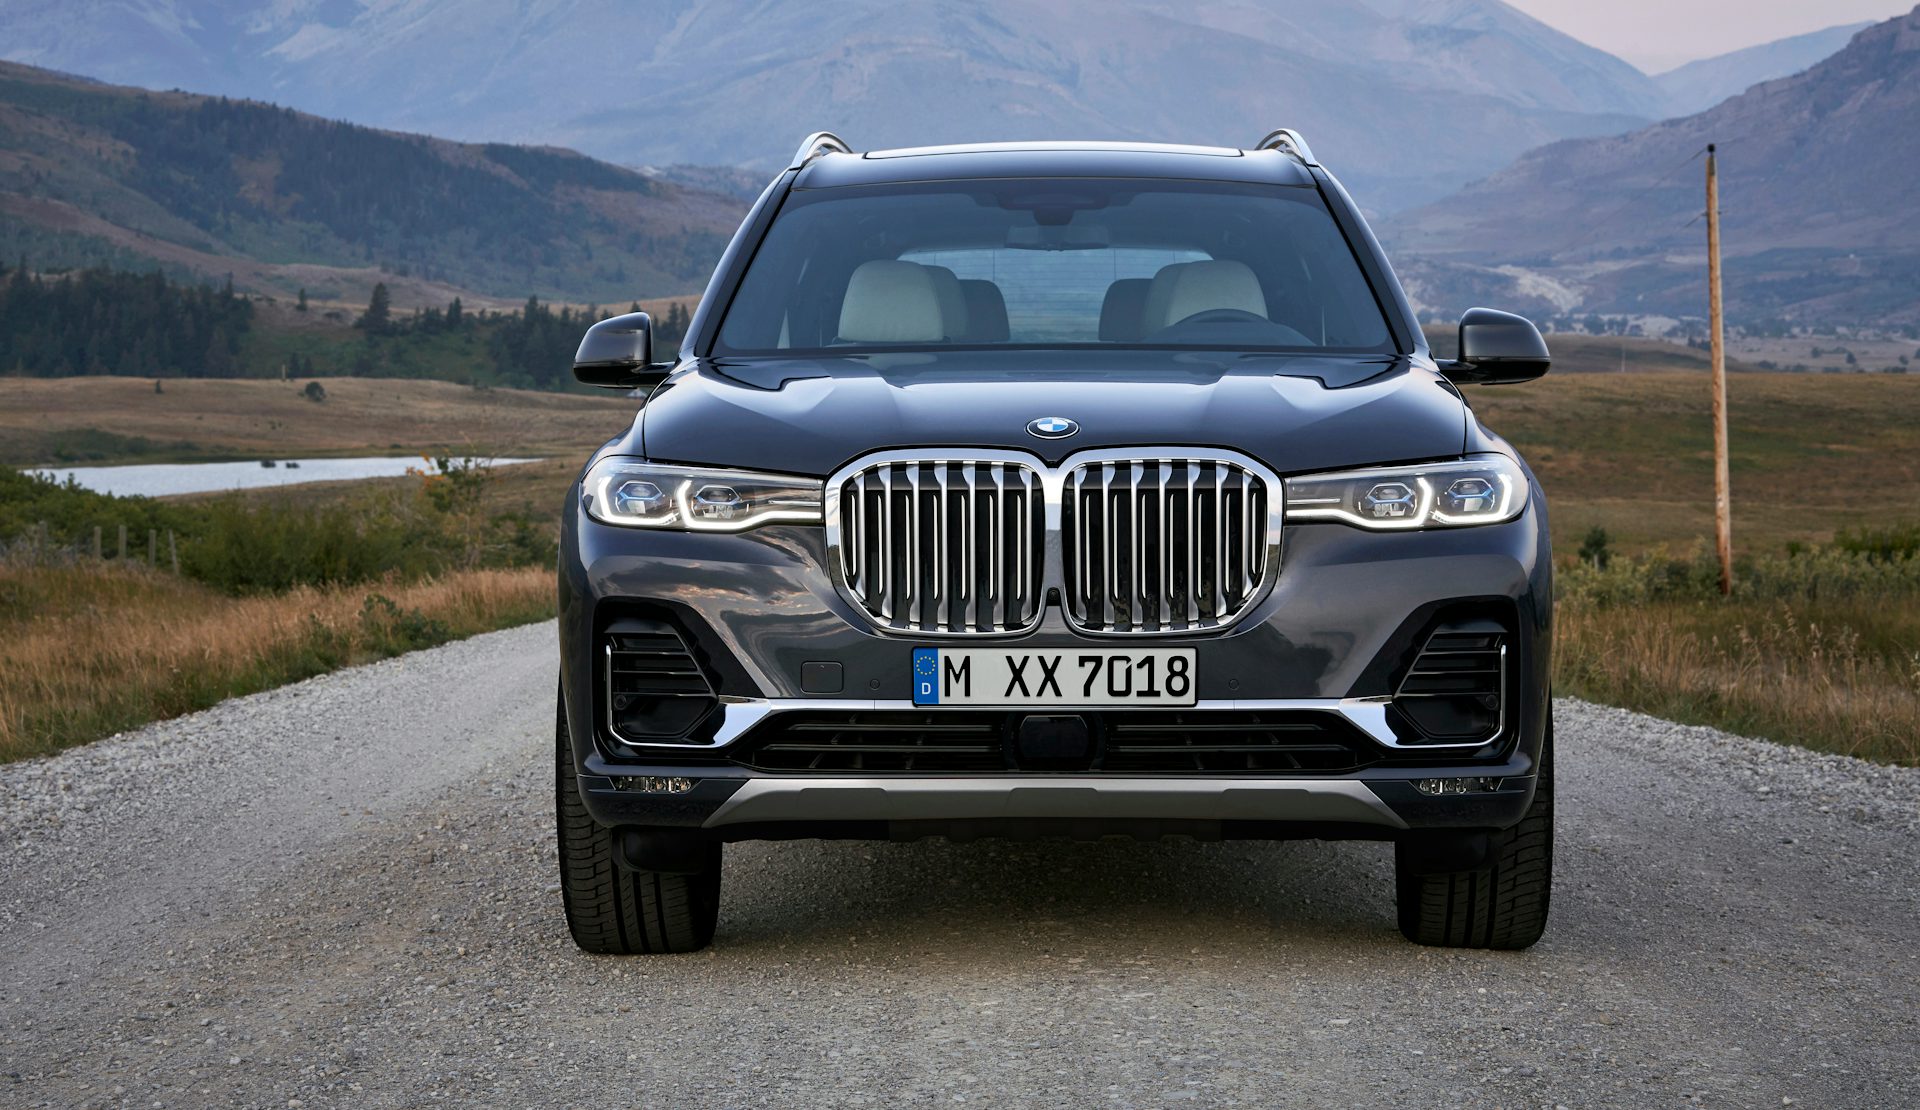 2018-19 BMW X7 price, specs and release date | carwow